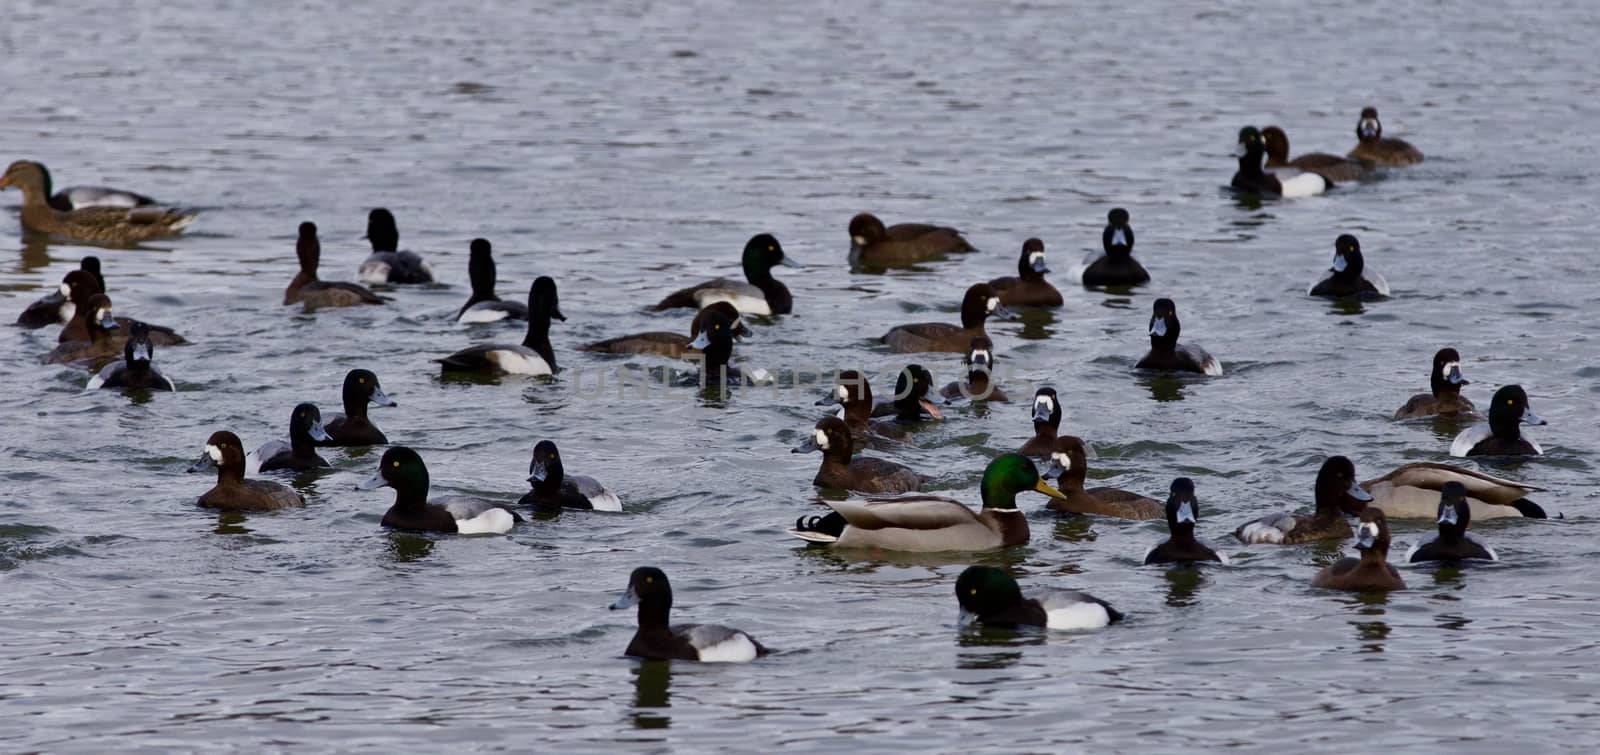 Beautiful isolated photo of a swarm of ducks in the lake